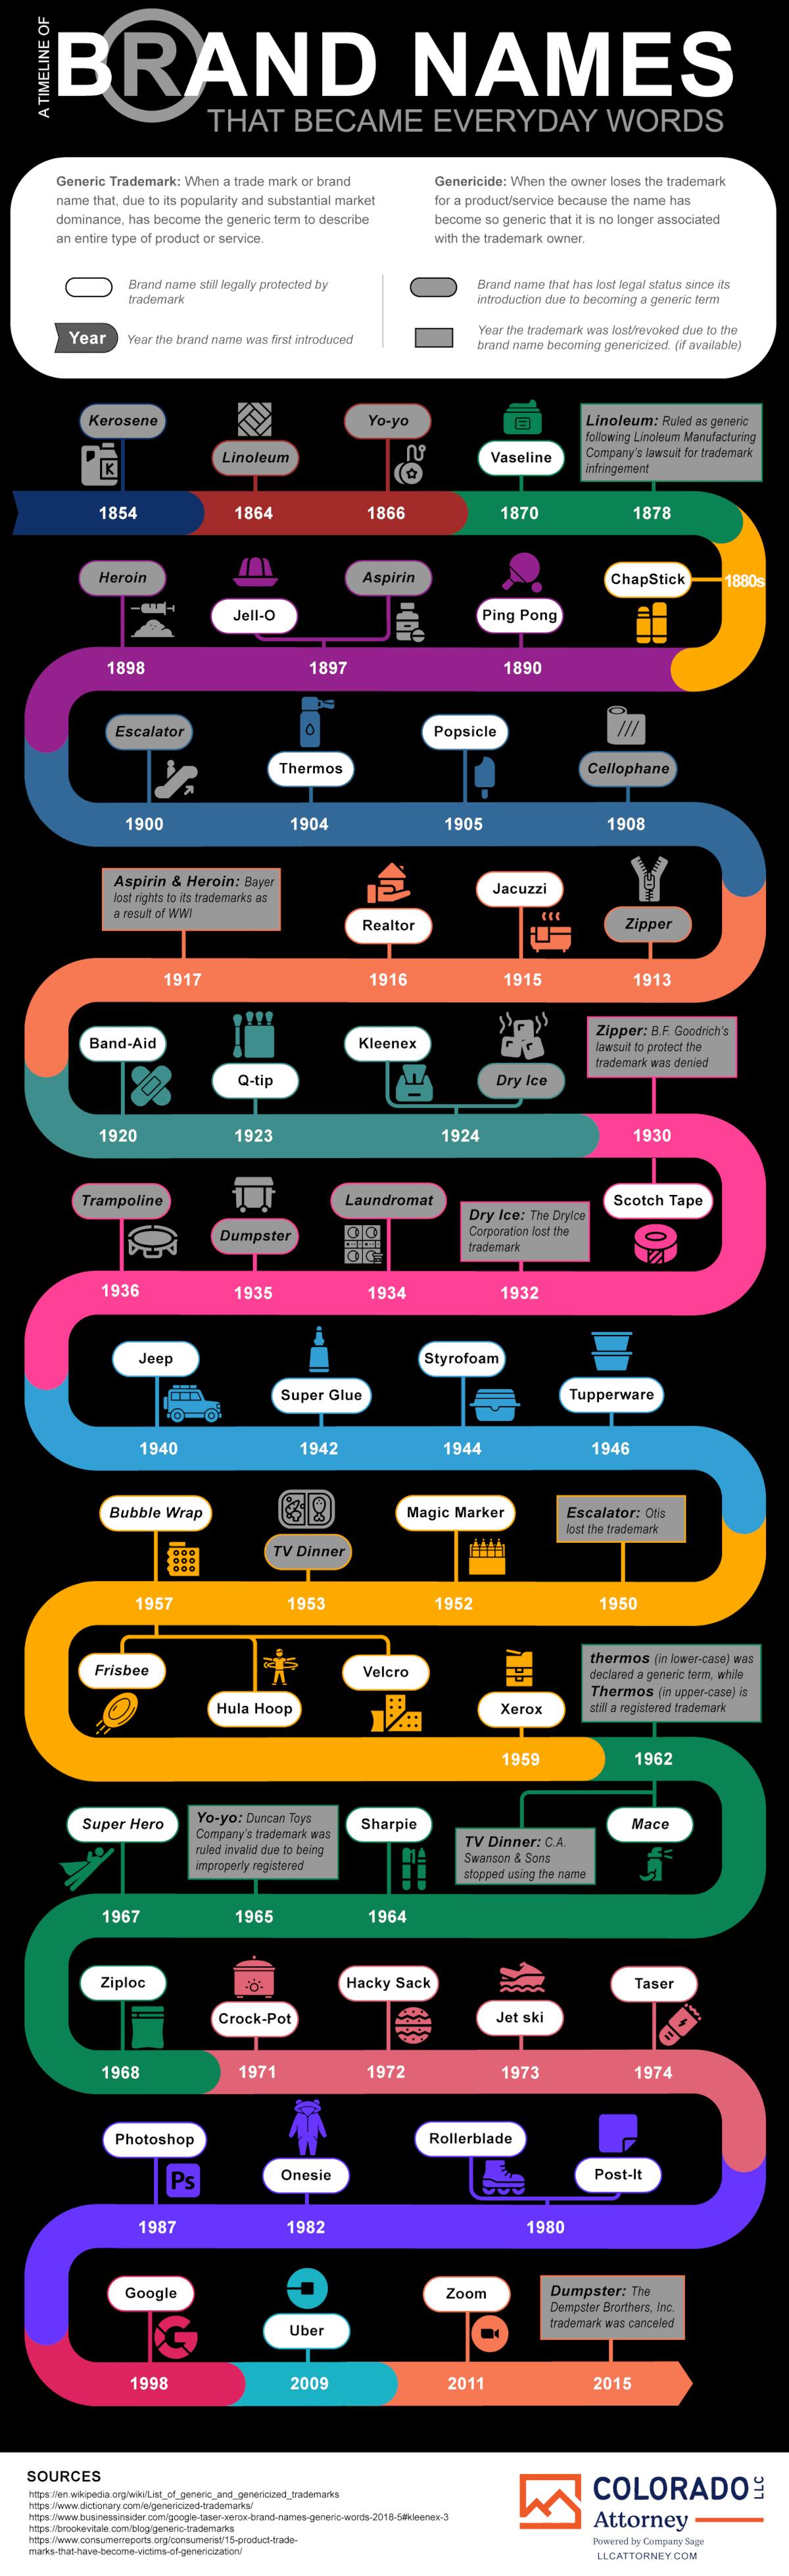 A Timeline of Brand Names That Became Everyday Words - LLCAttorney.com - Infographic